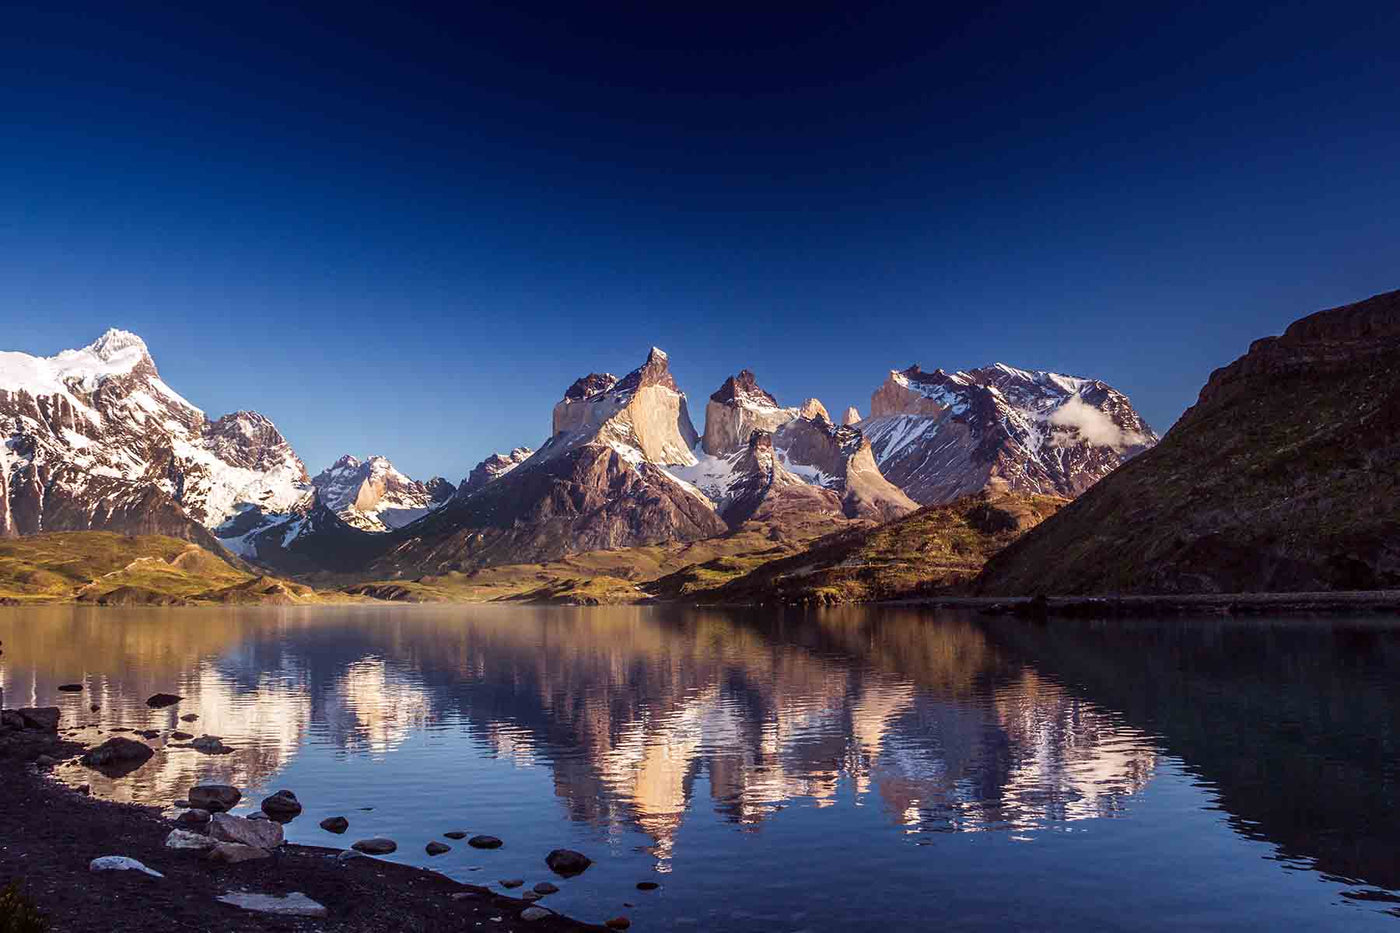 Hike of the Week: The O Circuit in Torres del Paine